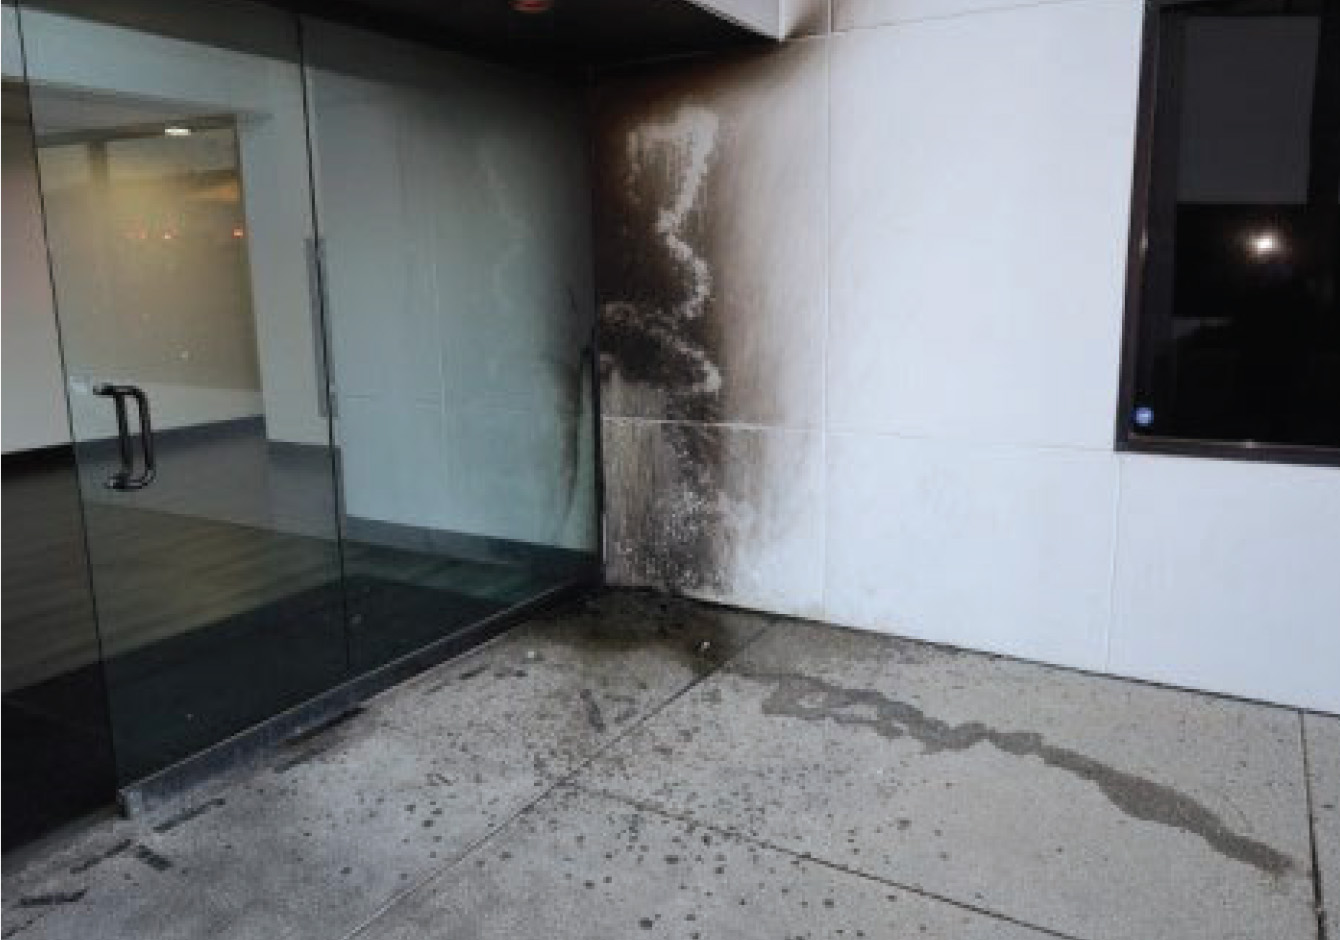 PHOTO: The federal complaint included a photo of damage to a Planned Parenthood in Costa Mesa, California, following an attack on March 13, 2022.